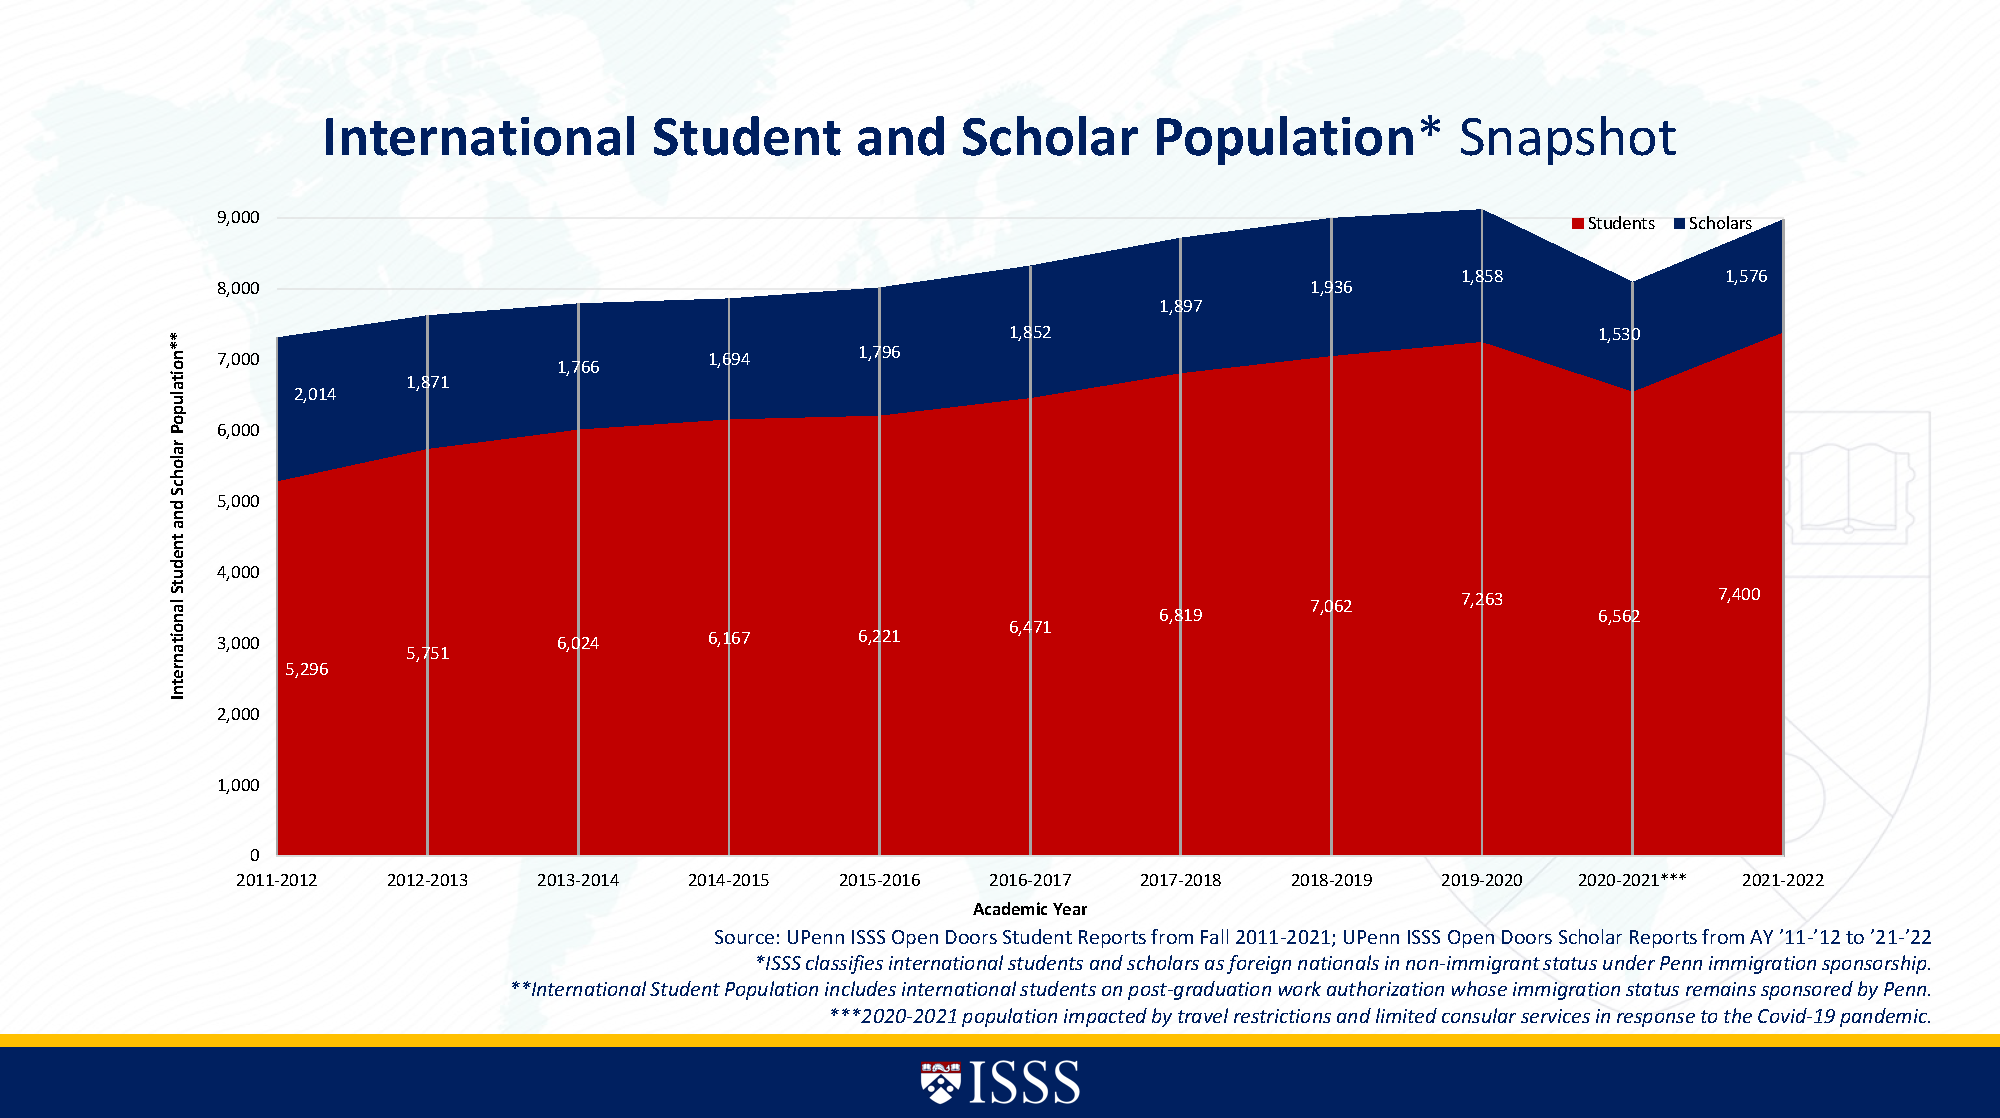 Graph UPenn ISSS Open Doors Student Scholar Populations from 2011-2012 to 2021-2022